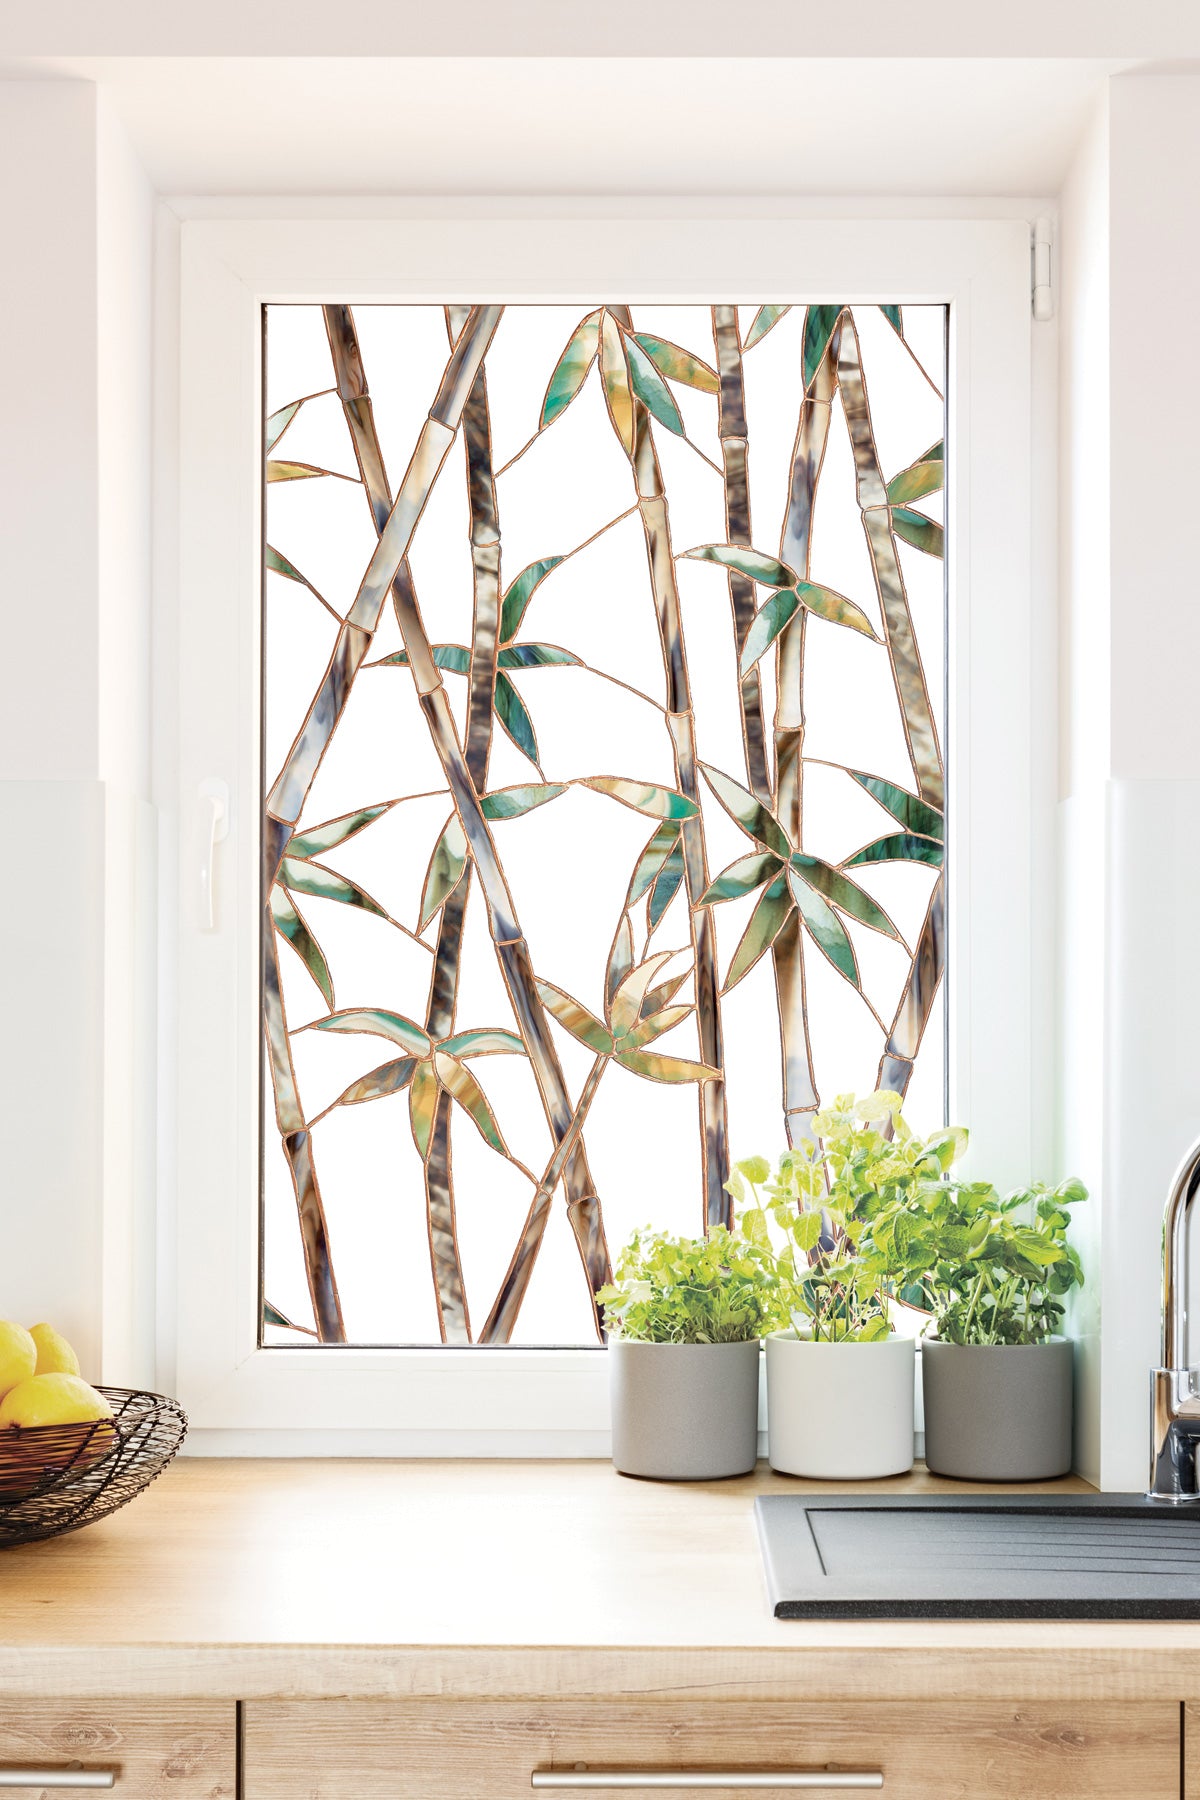 Glass Bamboo Stained Glass Decorative Static Cling Window Film 24" x 36"